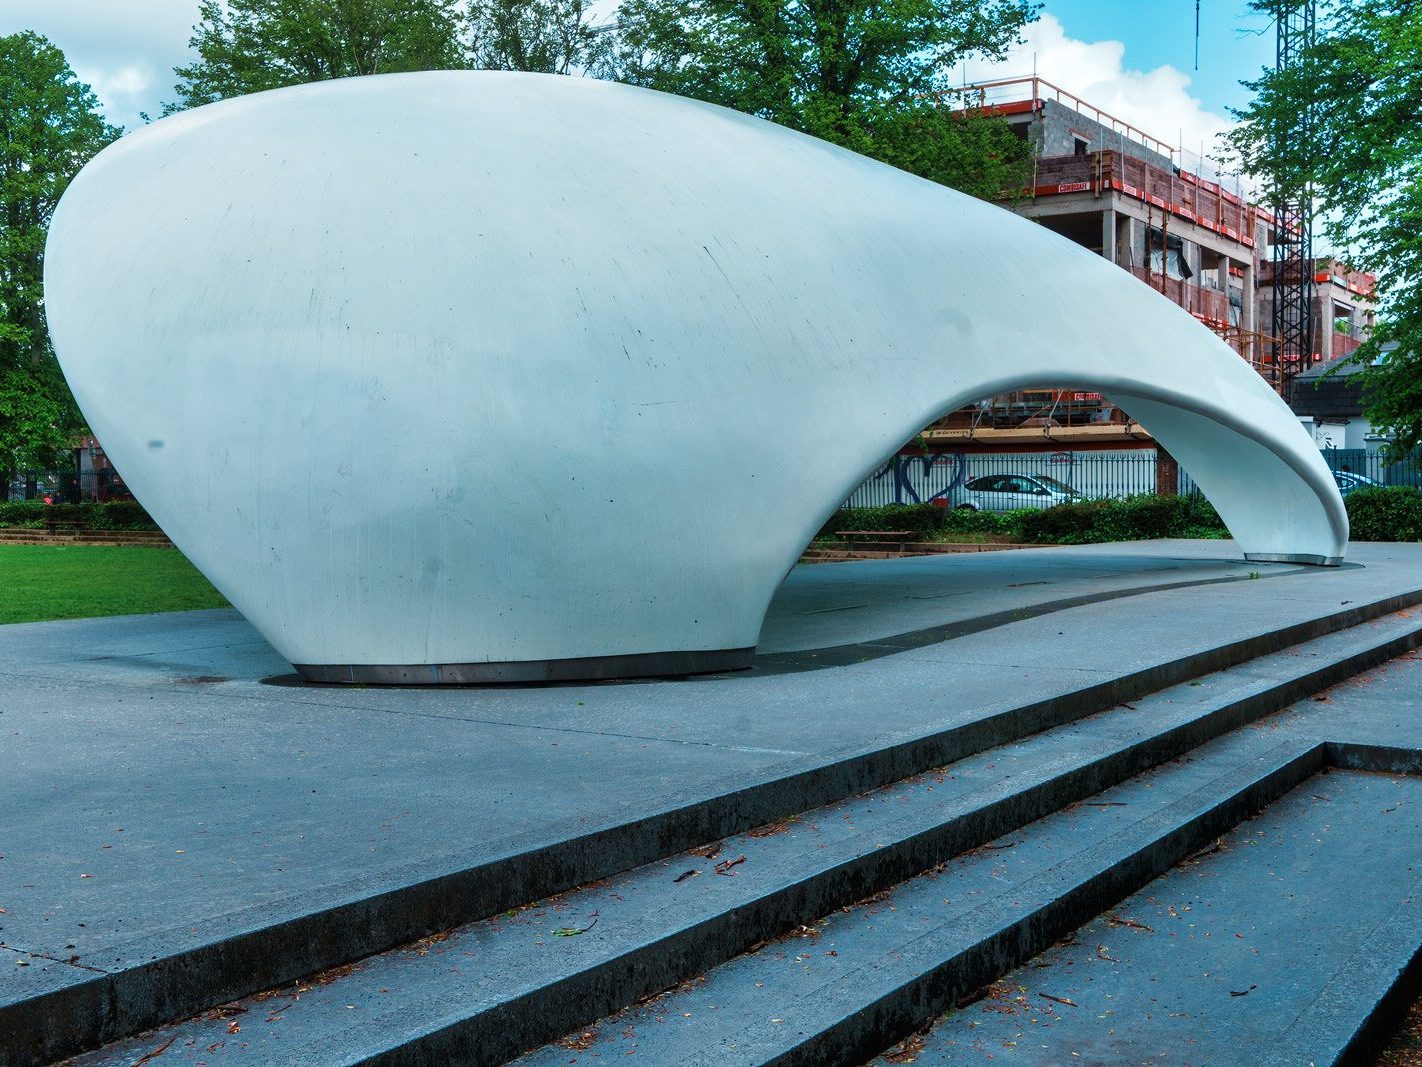 PAVILION OF LIGHT BY DARMODY ARCHITECTURE [BANDSTAND IN MARDYKE GARDENS IN CORK CITY] 012